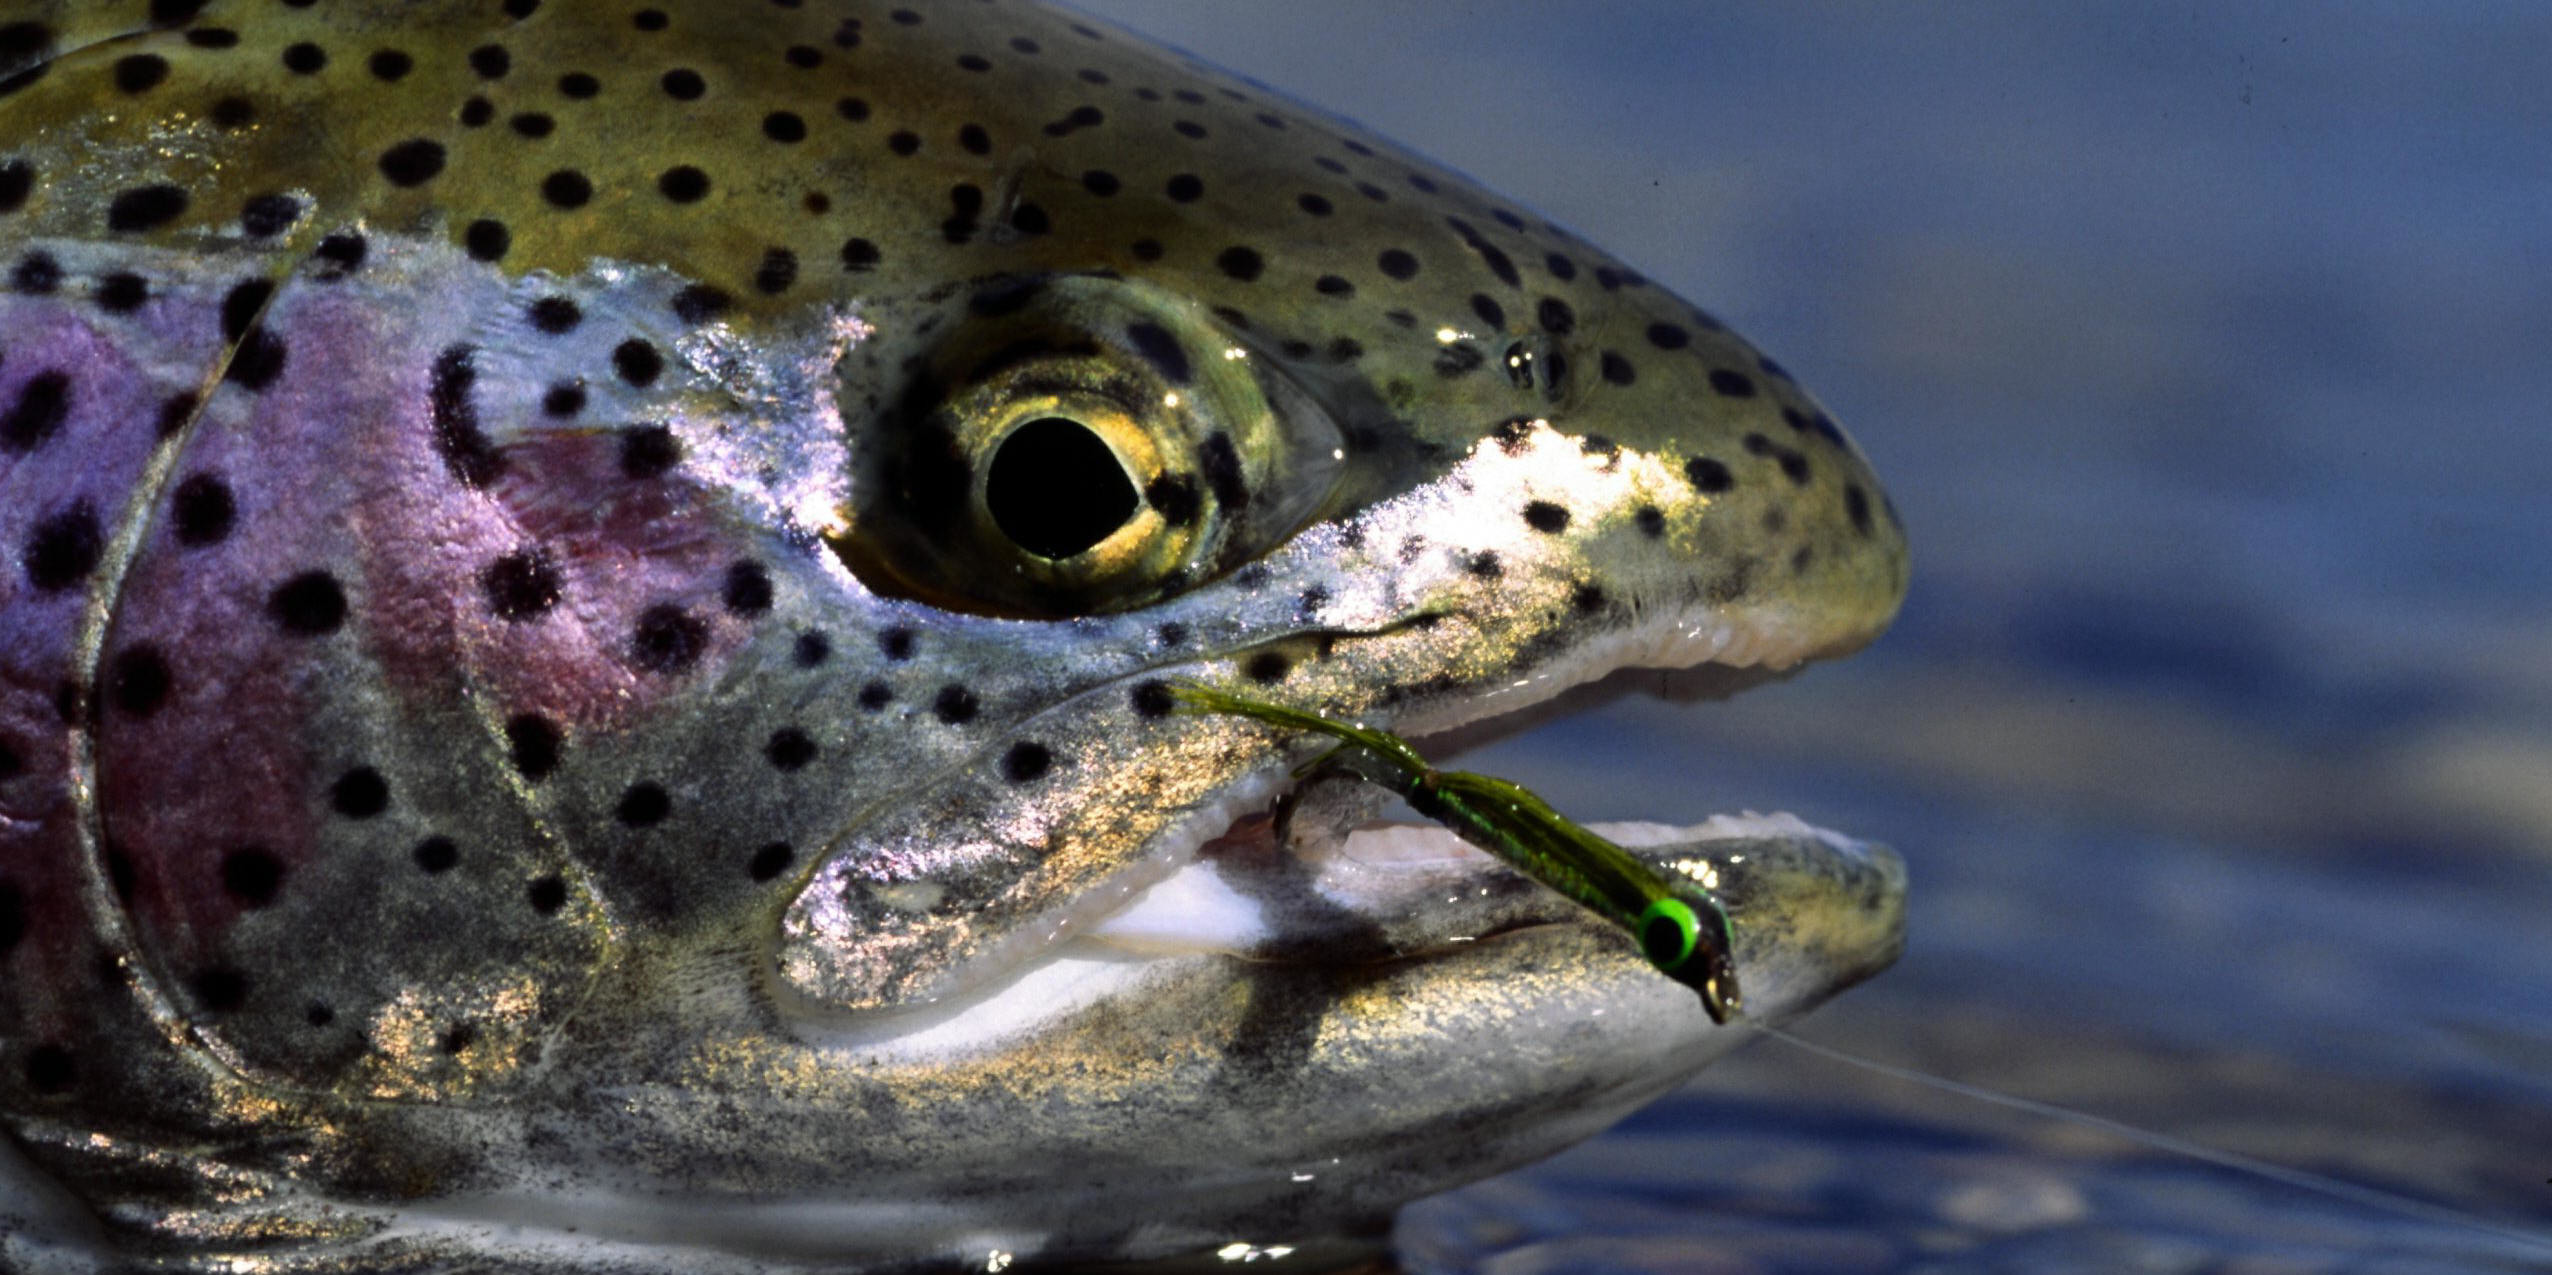 2552x1275 17 best images about fly fishing on pinterest | trout, luxury log, Fishing  Bait